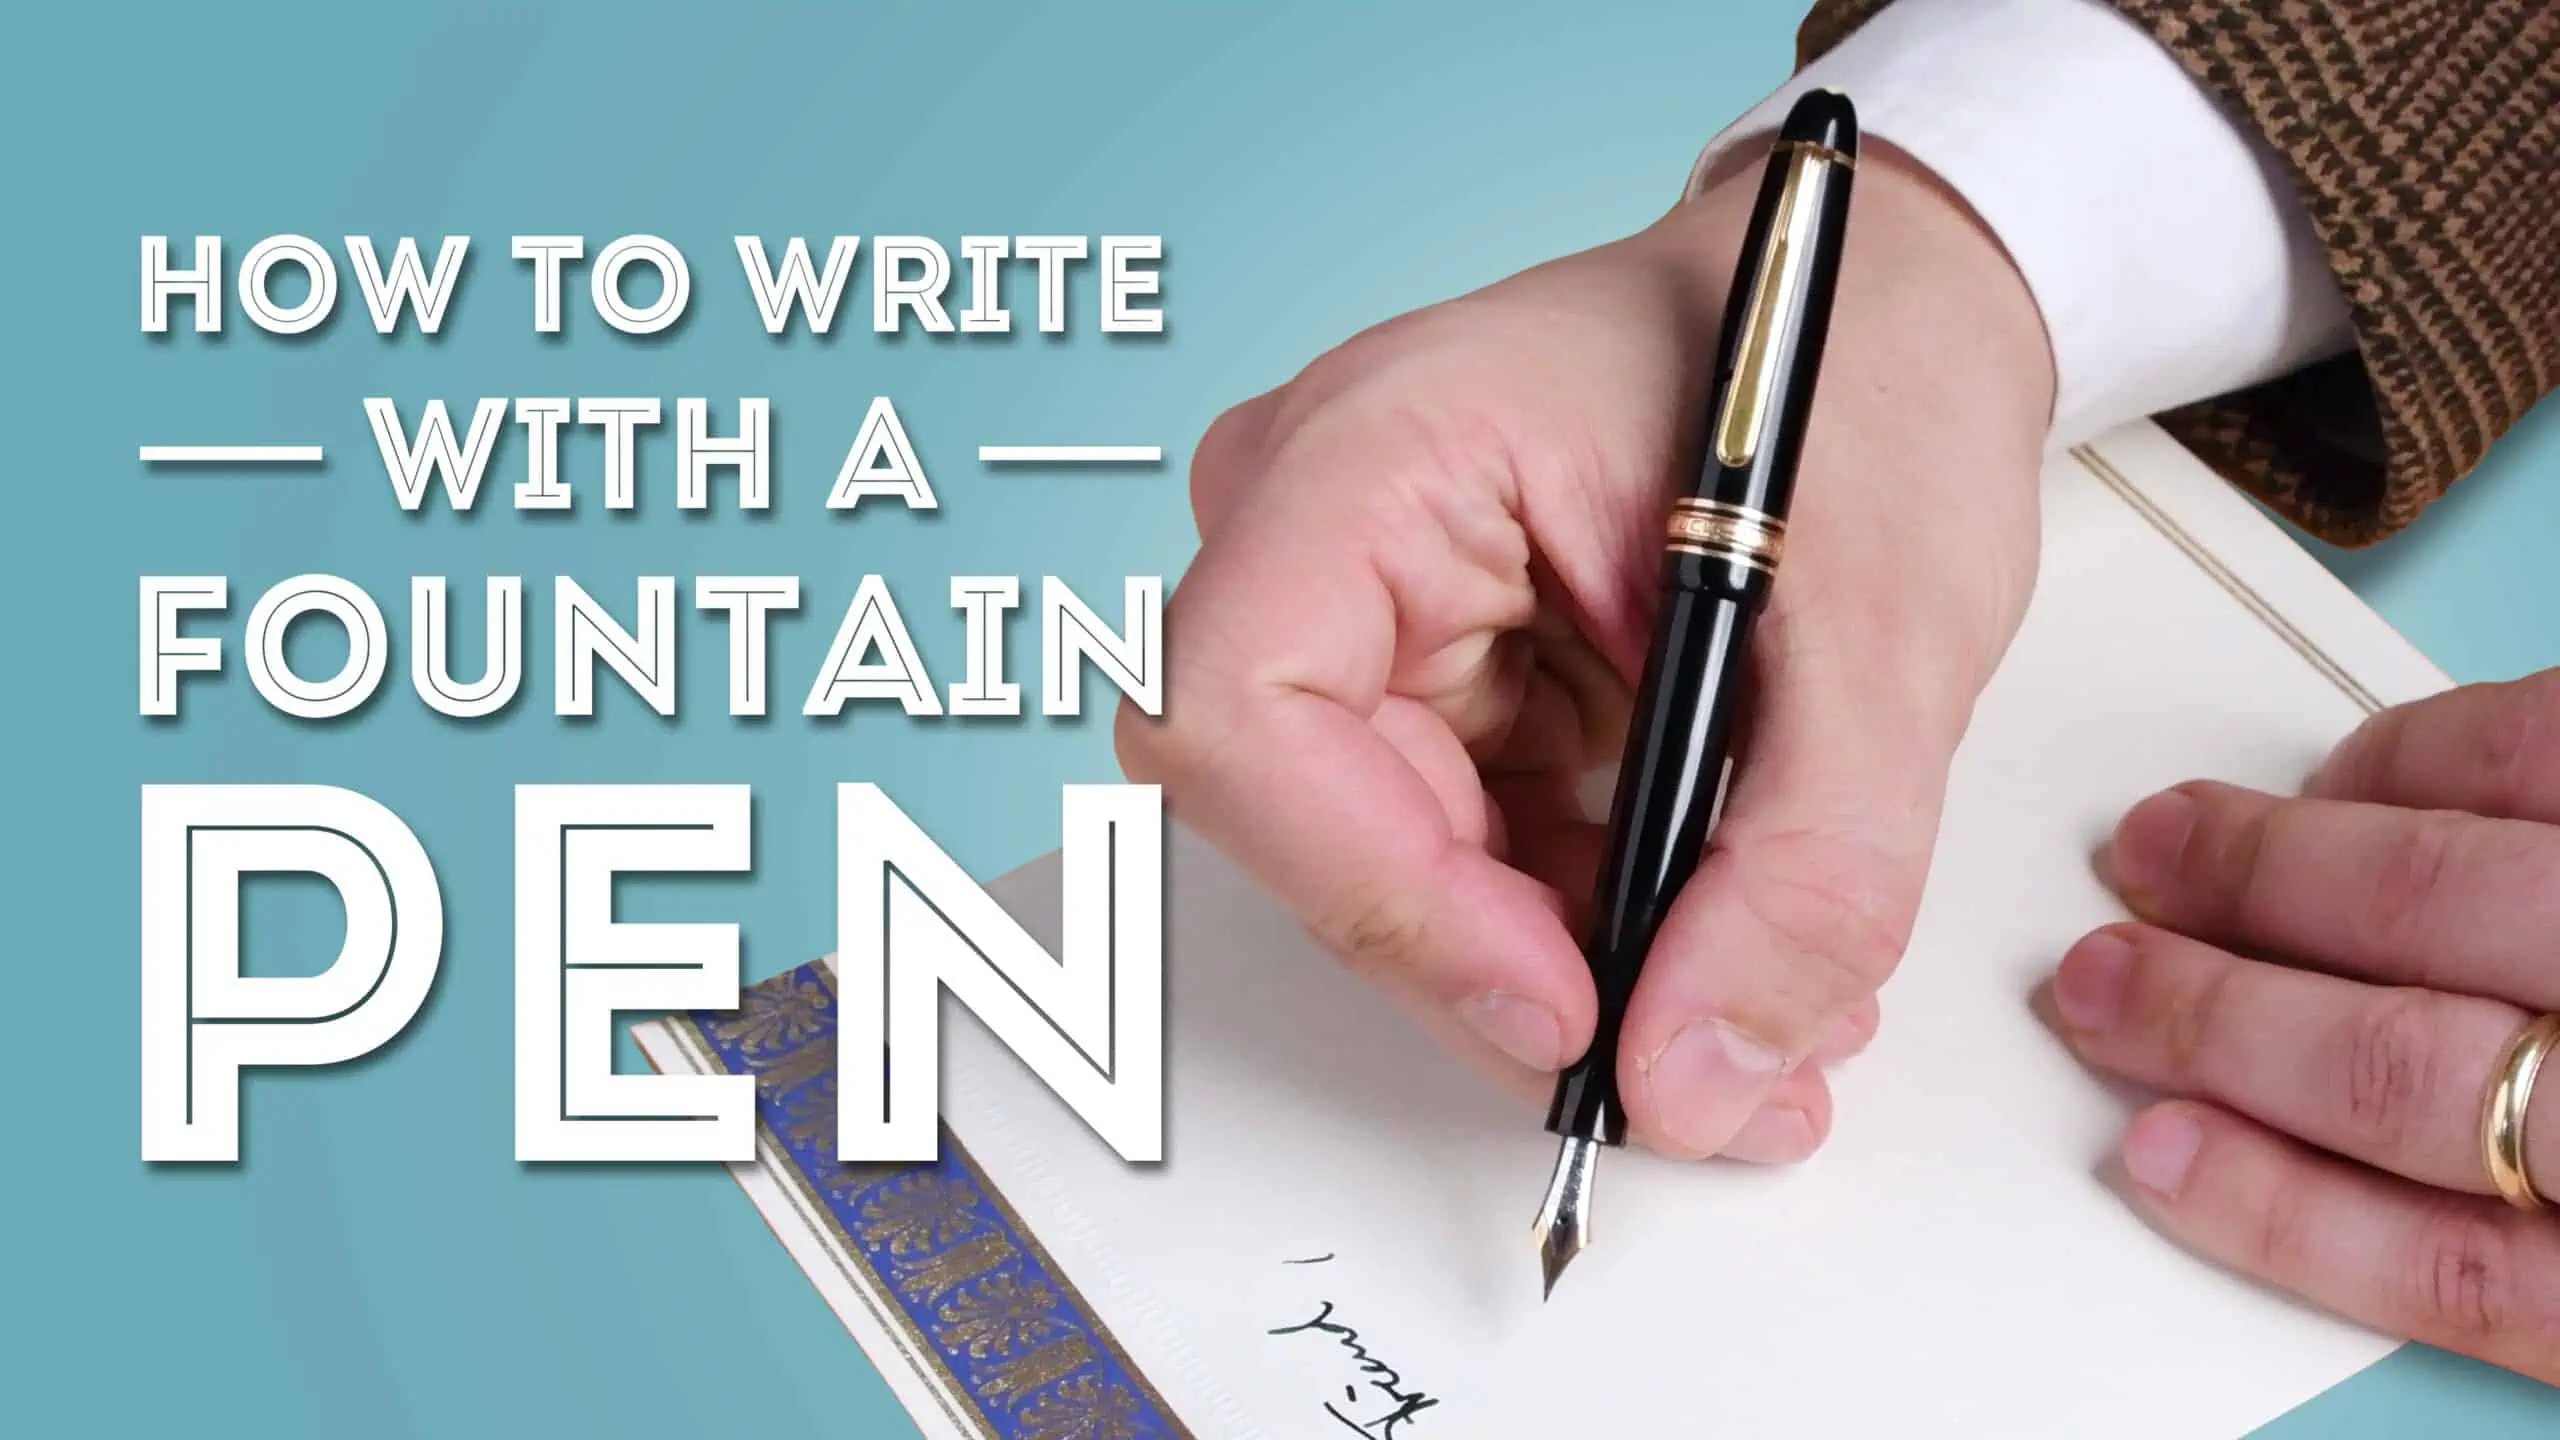 How To Write With Fountain Pen